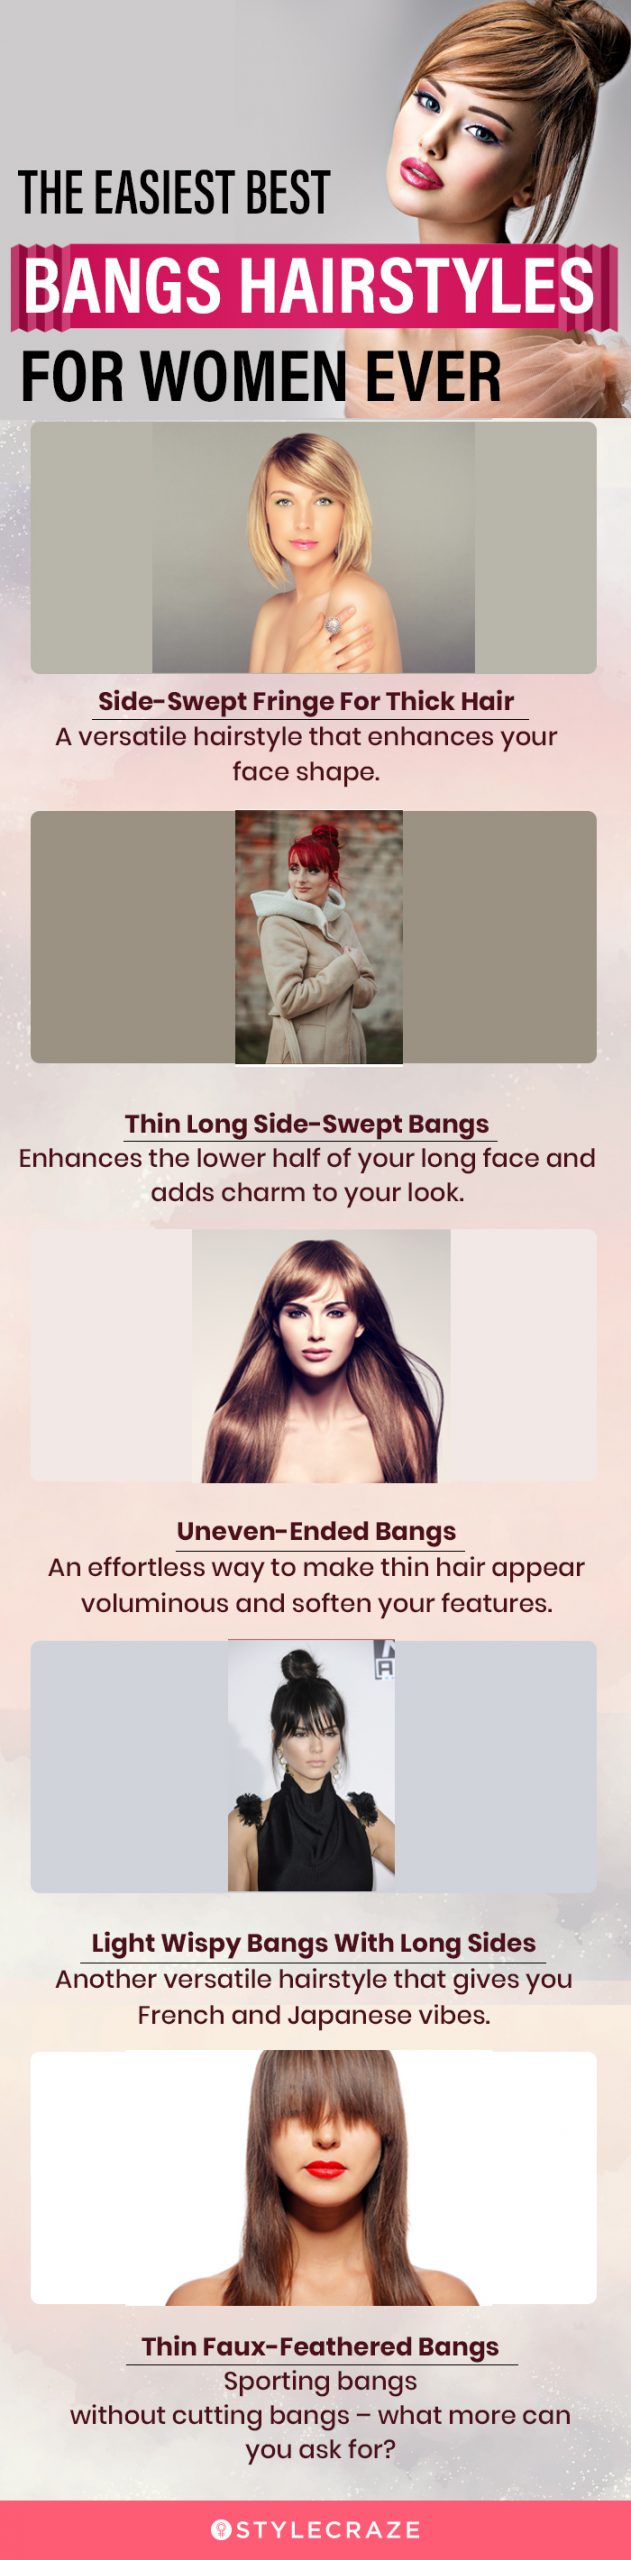 the easiest best bangs hairstyles for women ever (infographic)